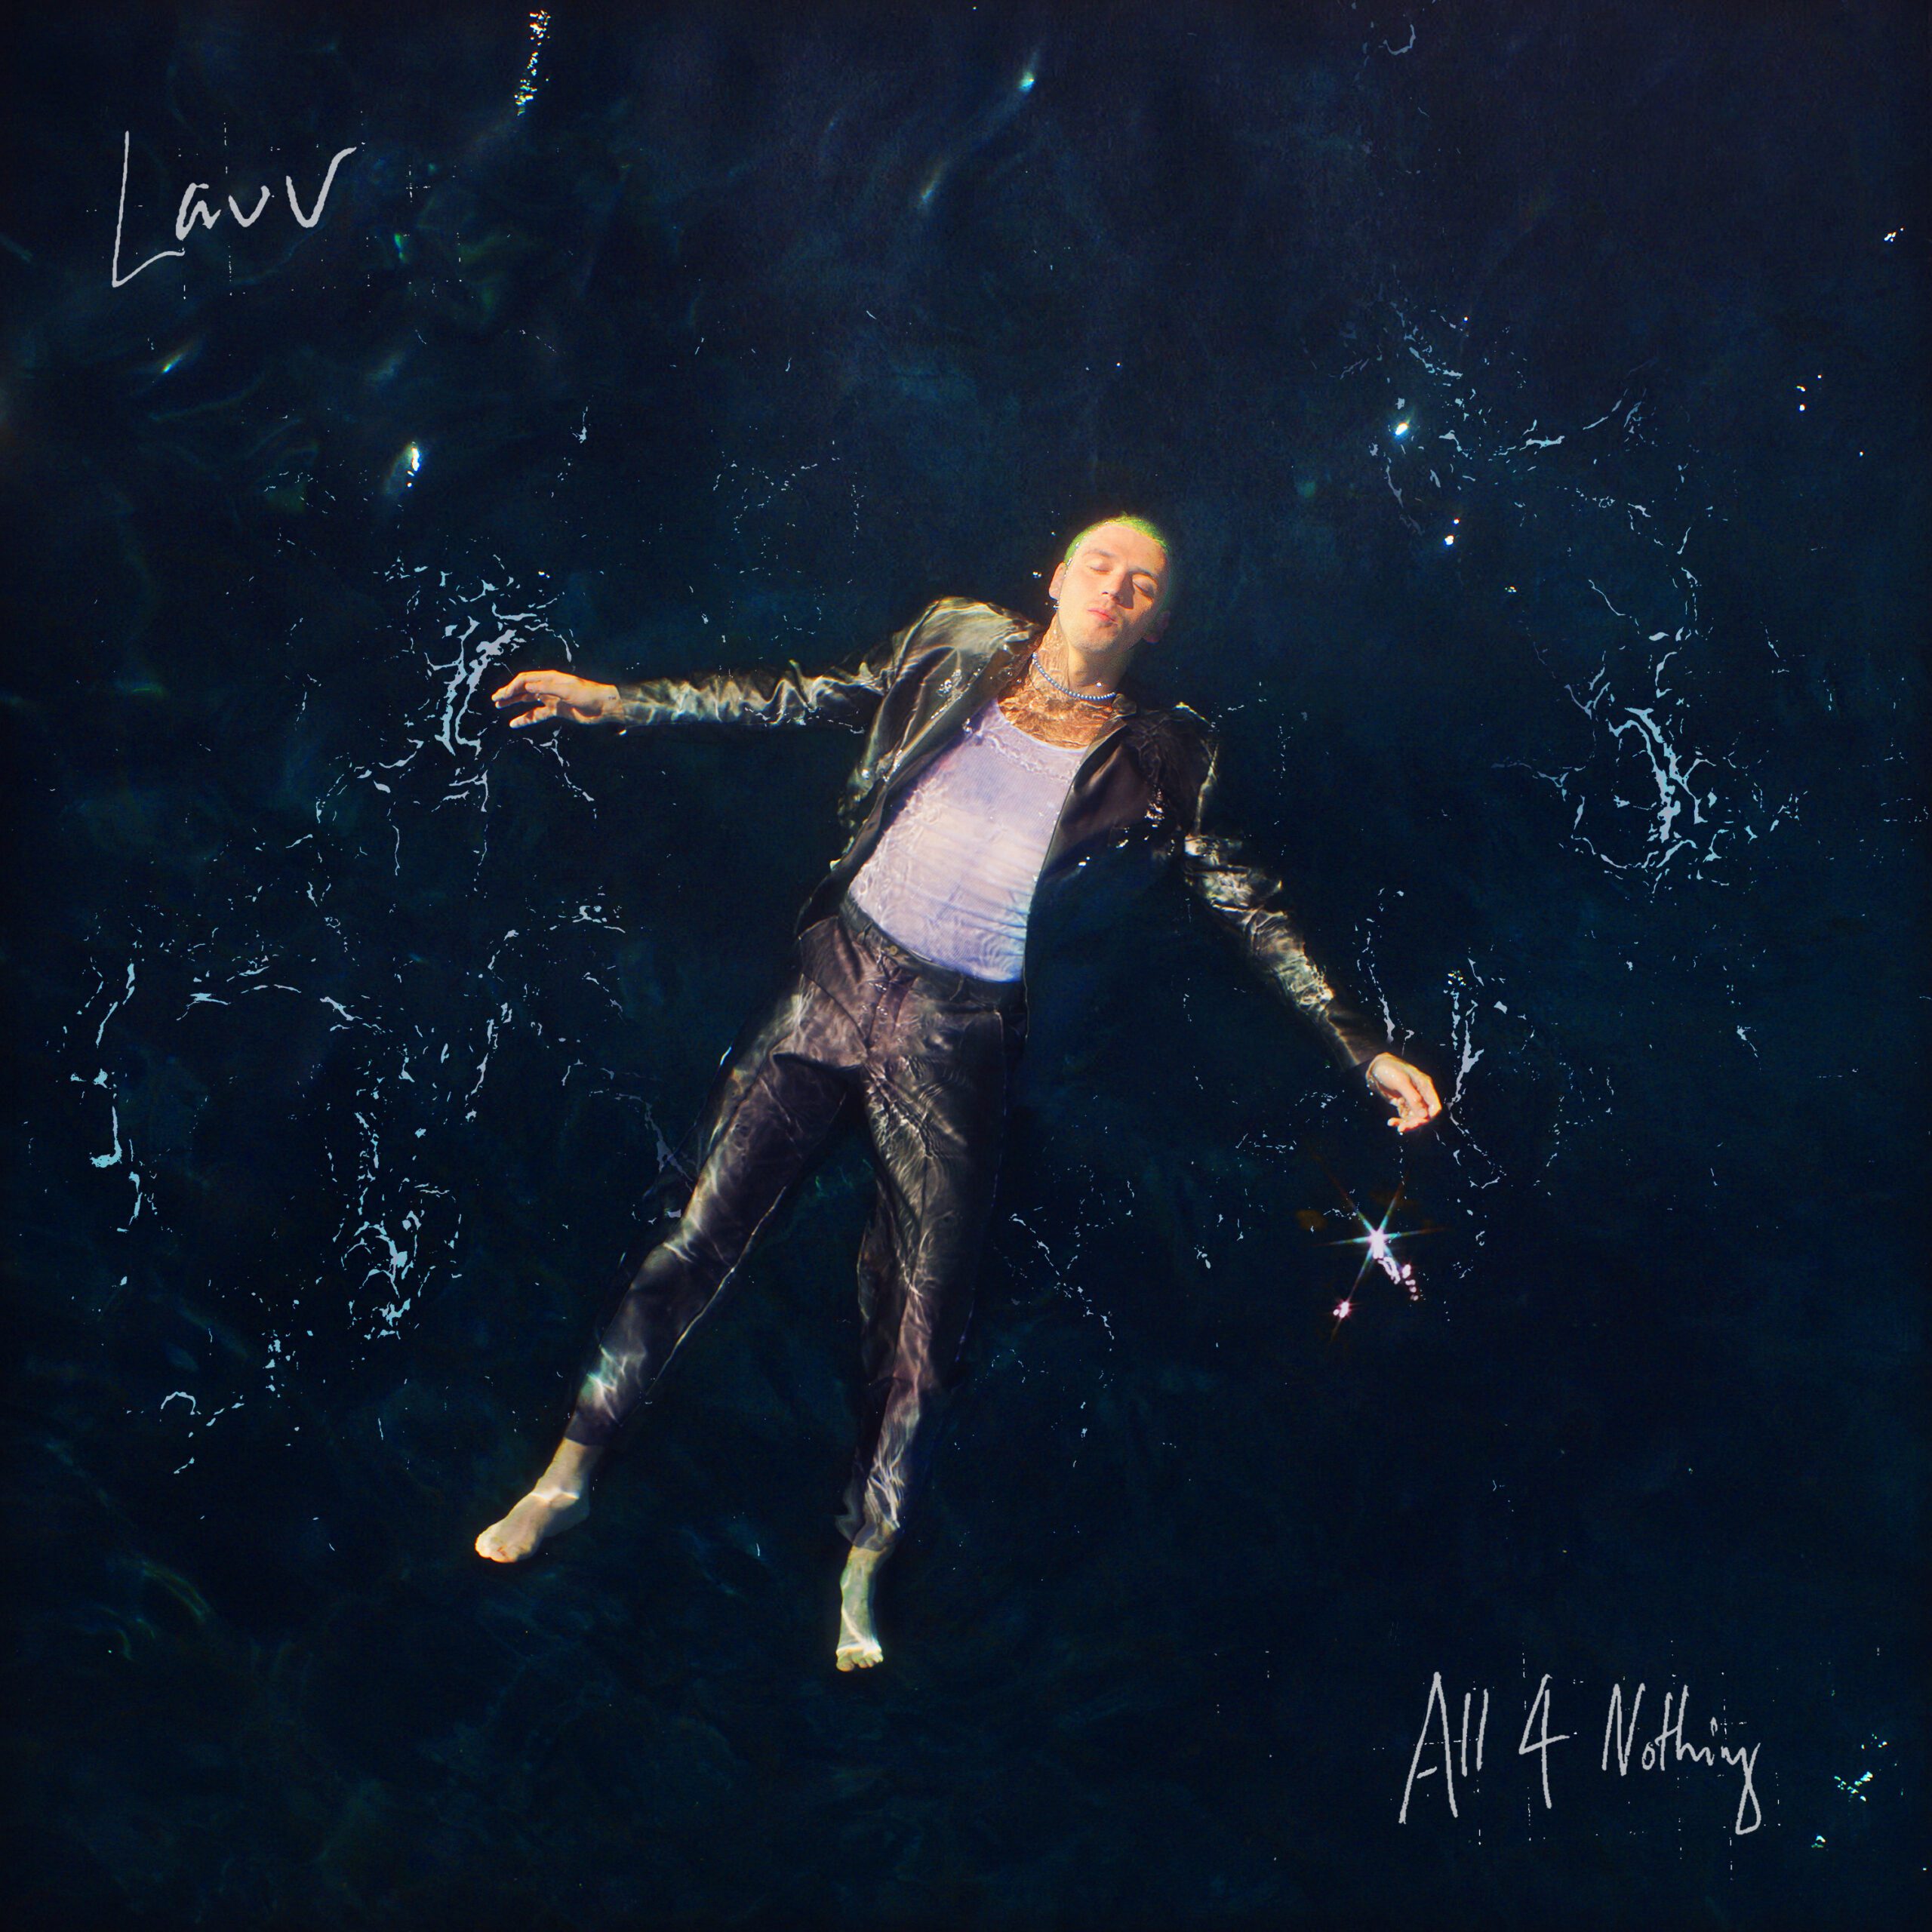 The Album Artwork of Lauv for his album "All 4 Nothing" credit Hannah Lux Davis via theoriel for use by 360 Magazine